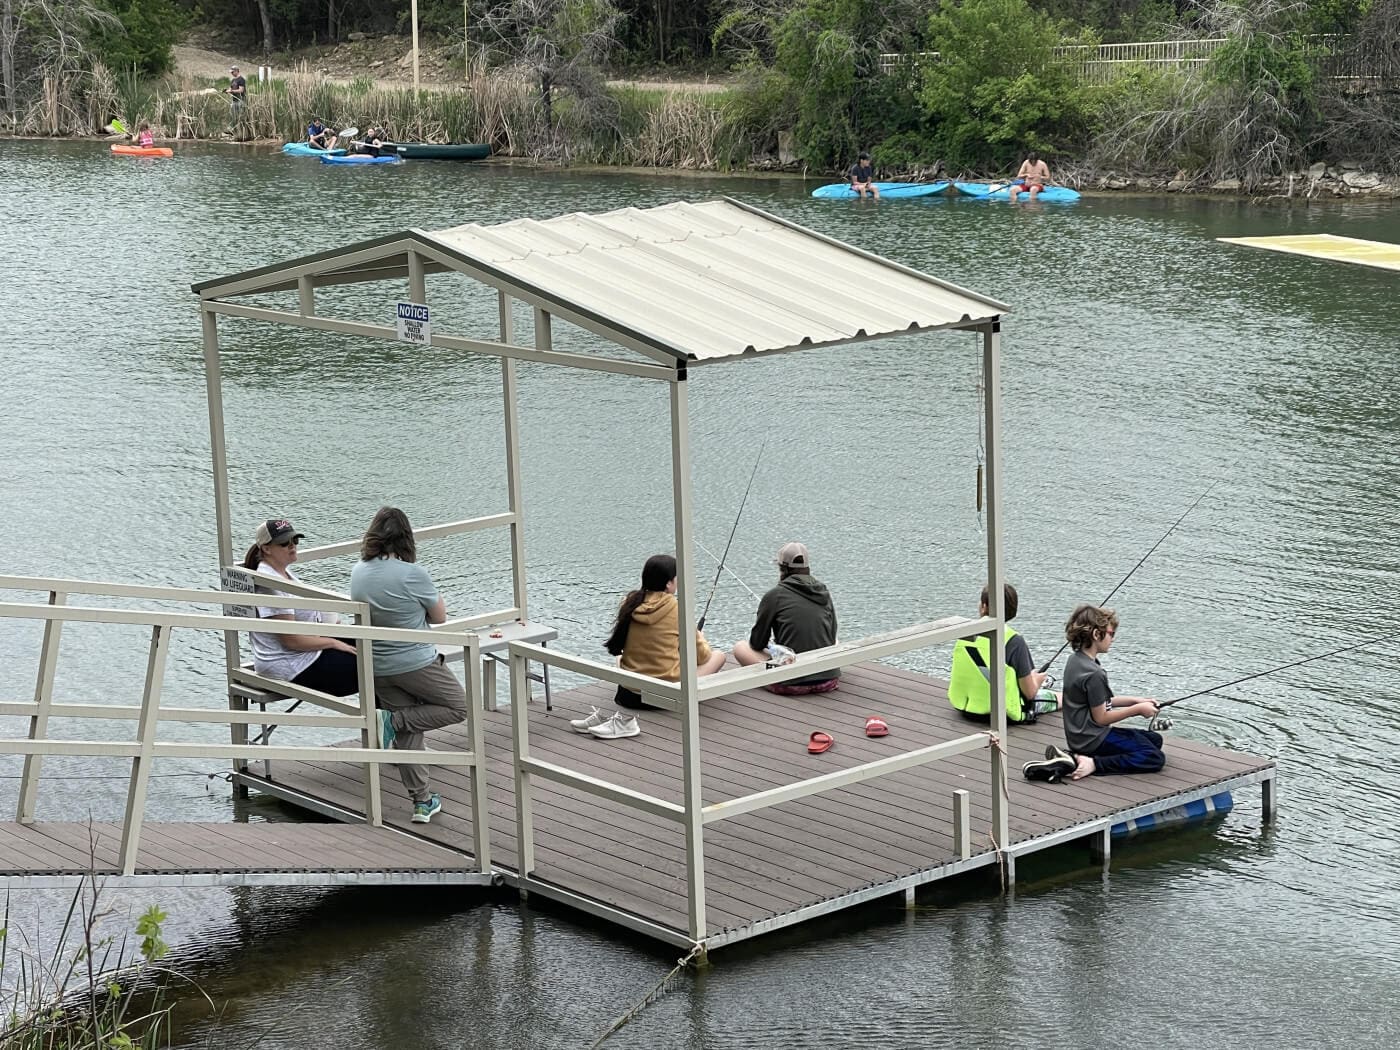 A group of people sitting on a dock on a lake.